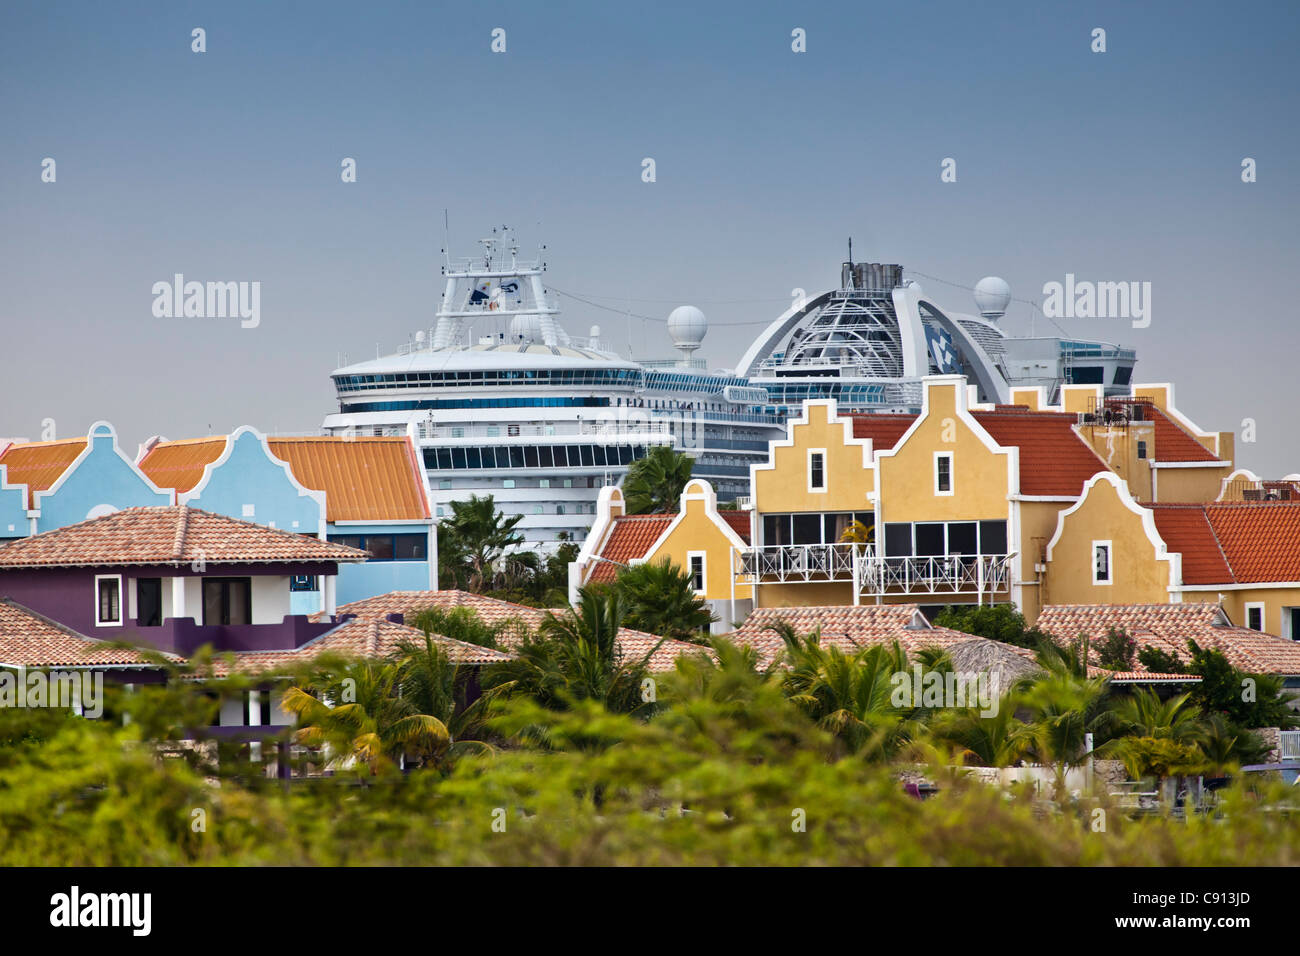 The Netherlands, Bonaire Island, Dutch Caribbean, Cruise ship in port. Holiday houses in old Dutch architecture style. Stock Photo